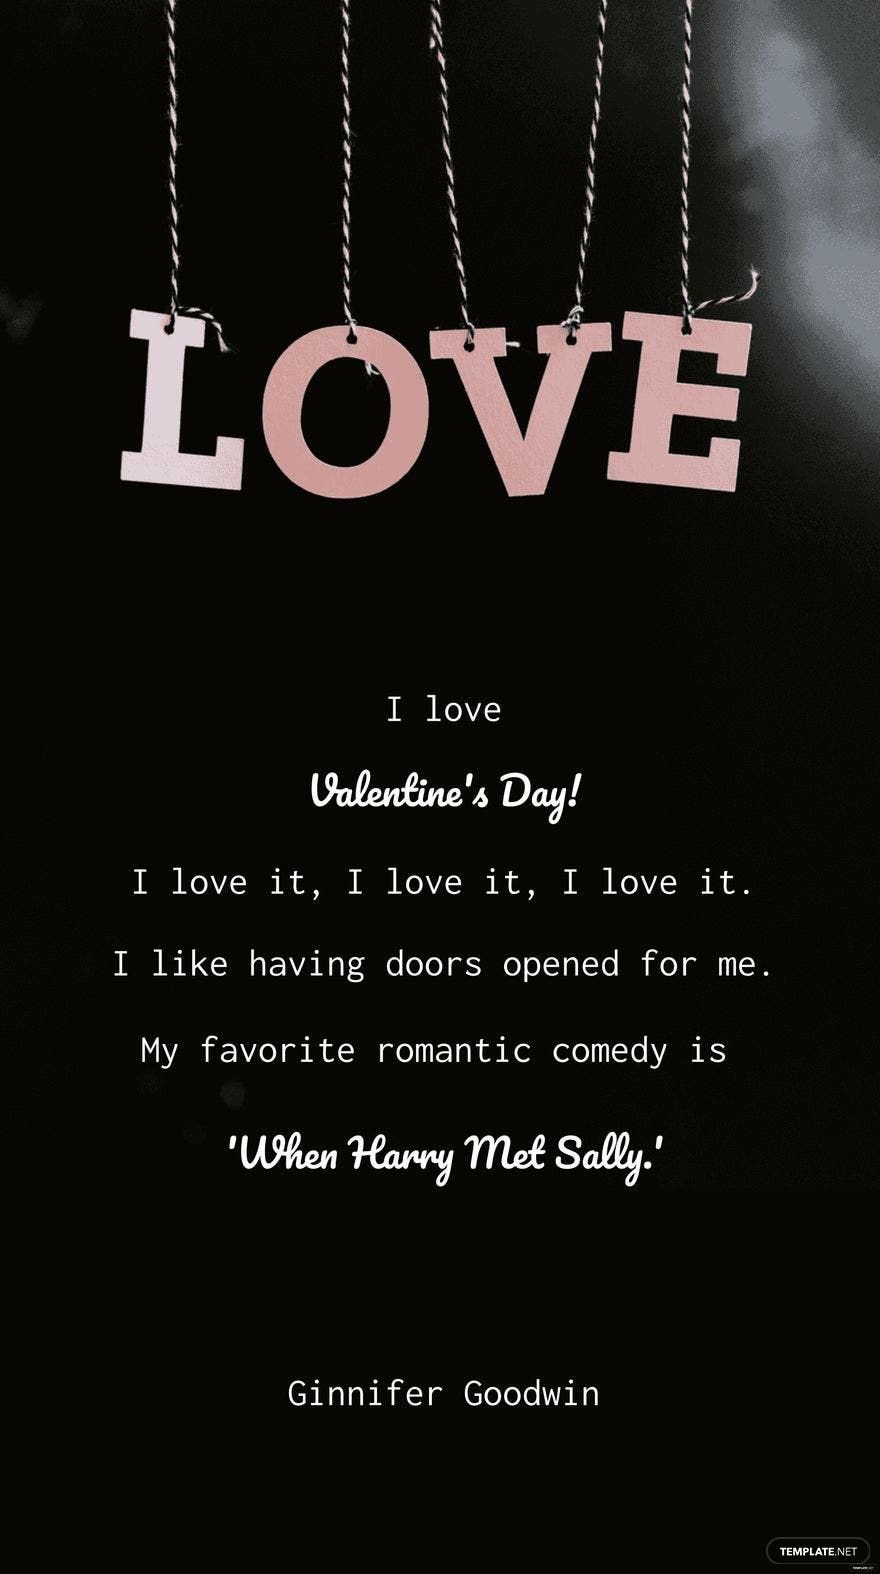 Free Ginnifer Goodwin - I love Valentine's Day! I love it, I love it, I love it. I like having doors opened for me. My favorite romantic comedy is 'When Harry Met Sally.' in JPEG